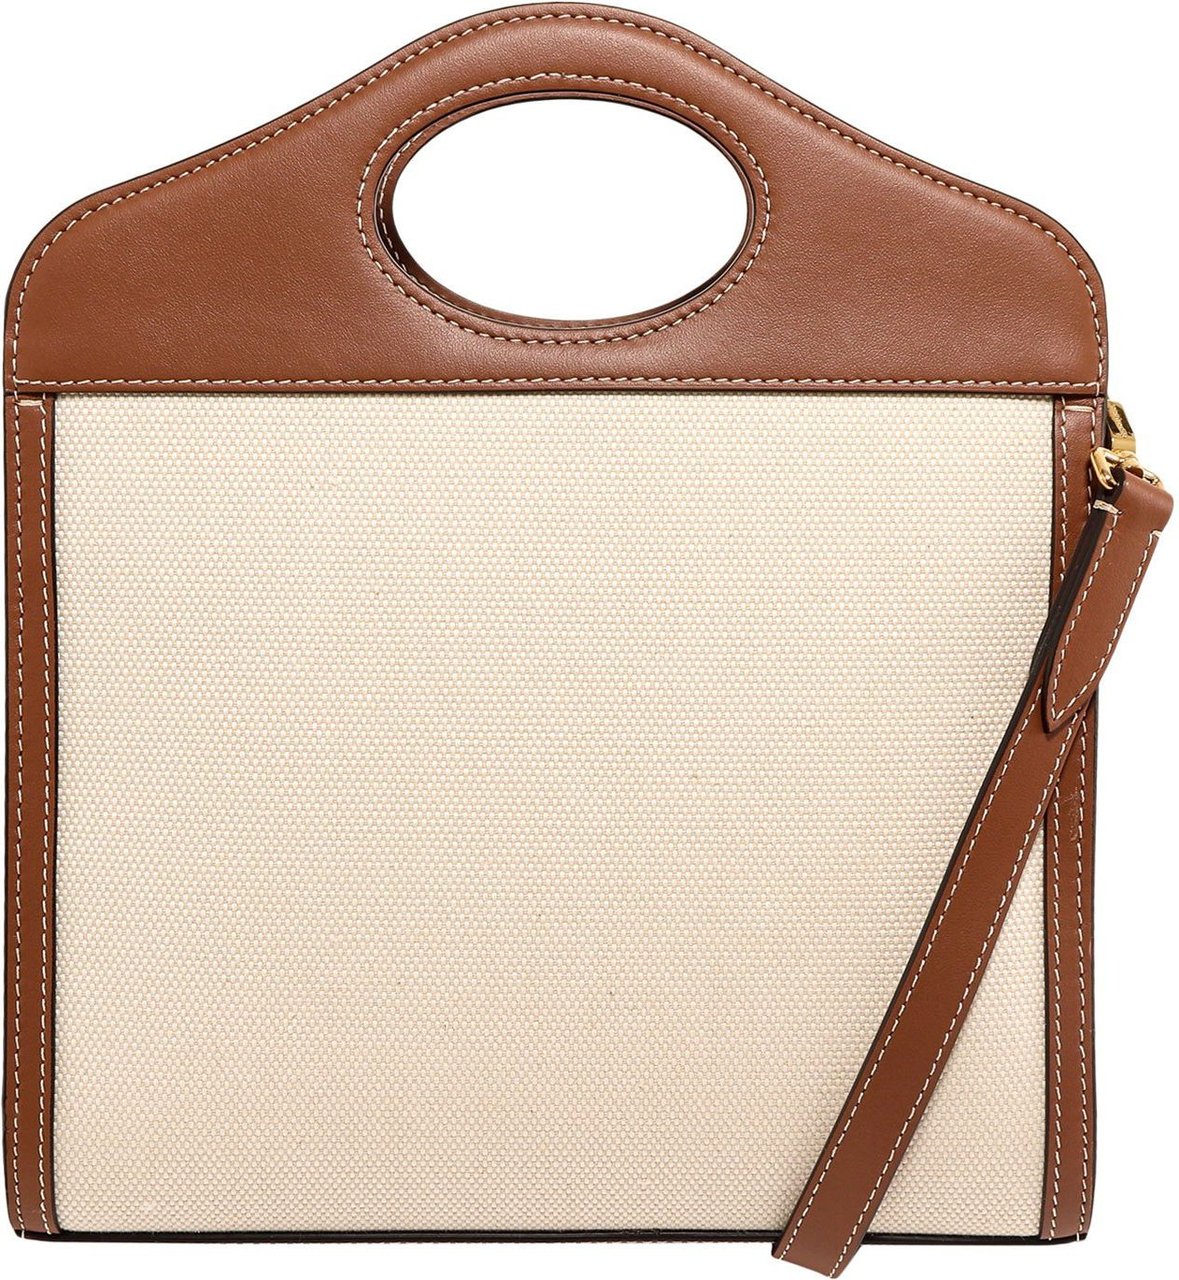 Burberry Canvas and leather handbag Beige